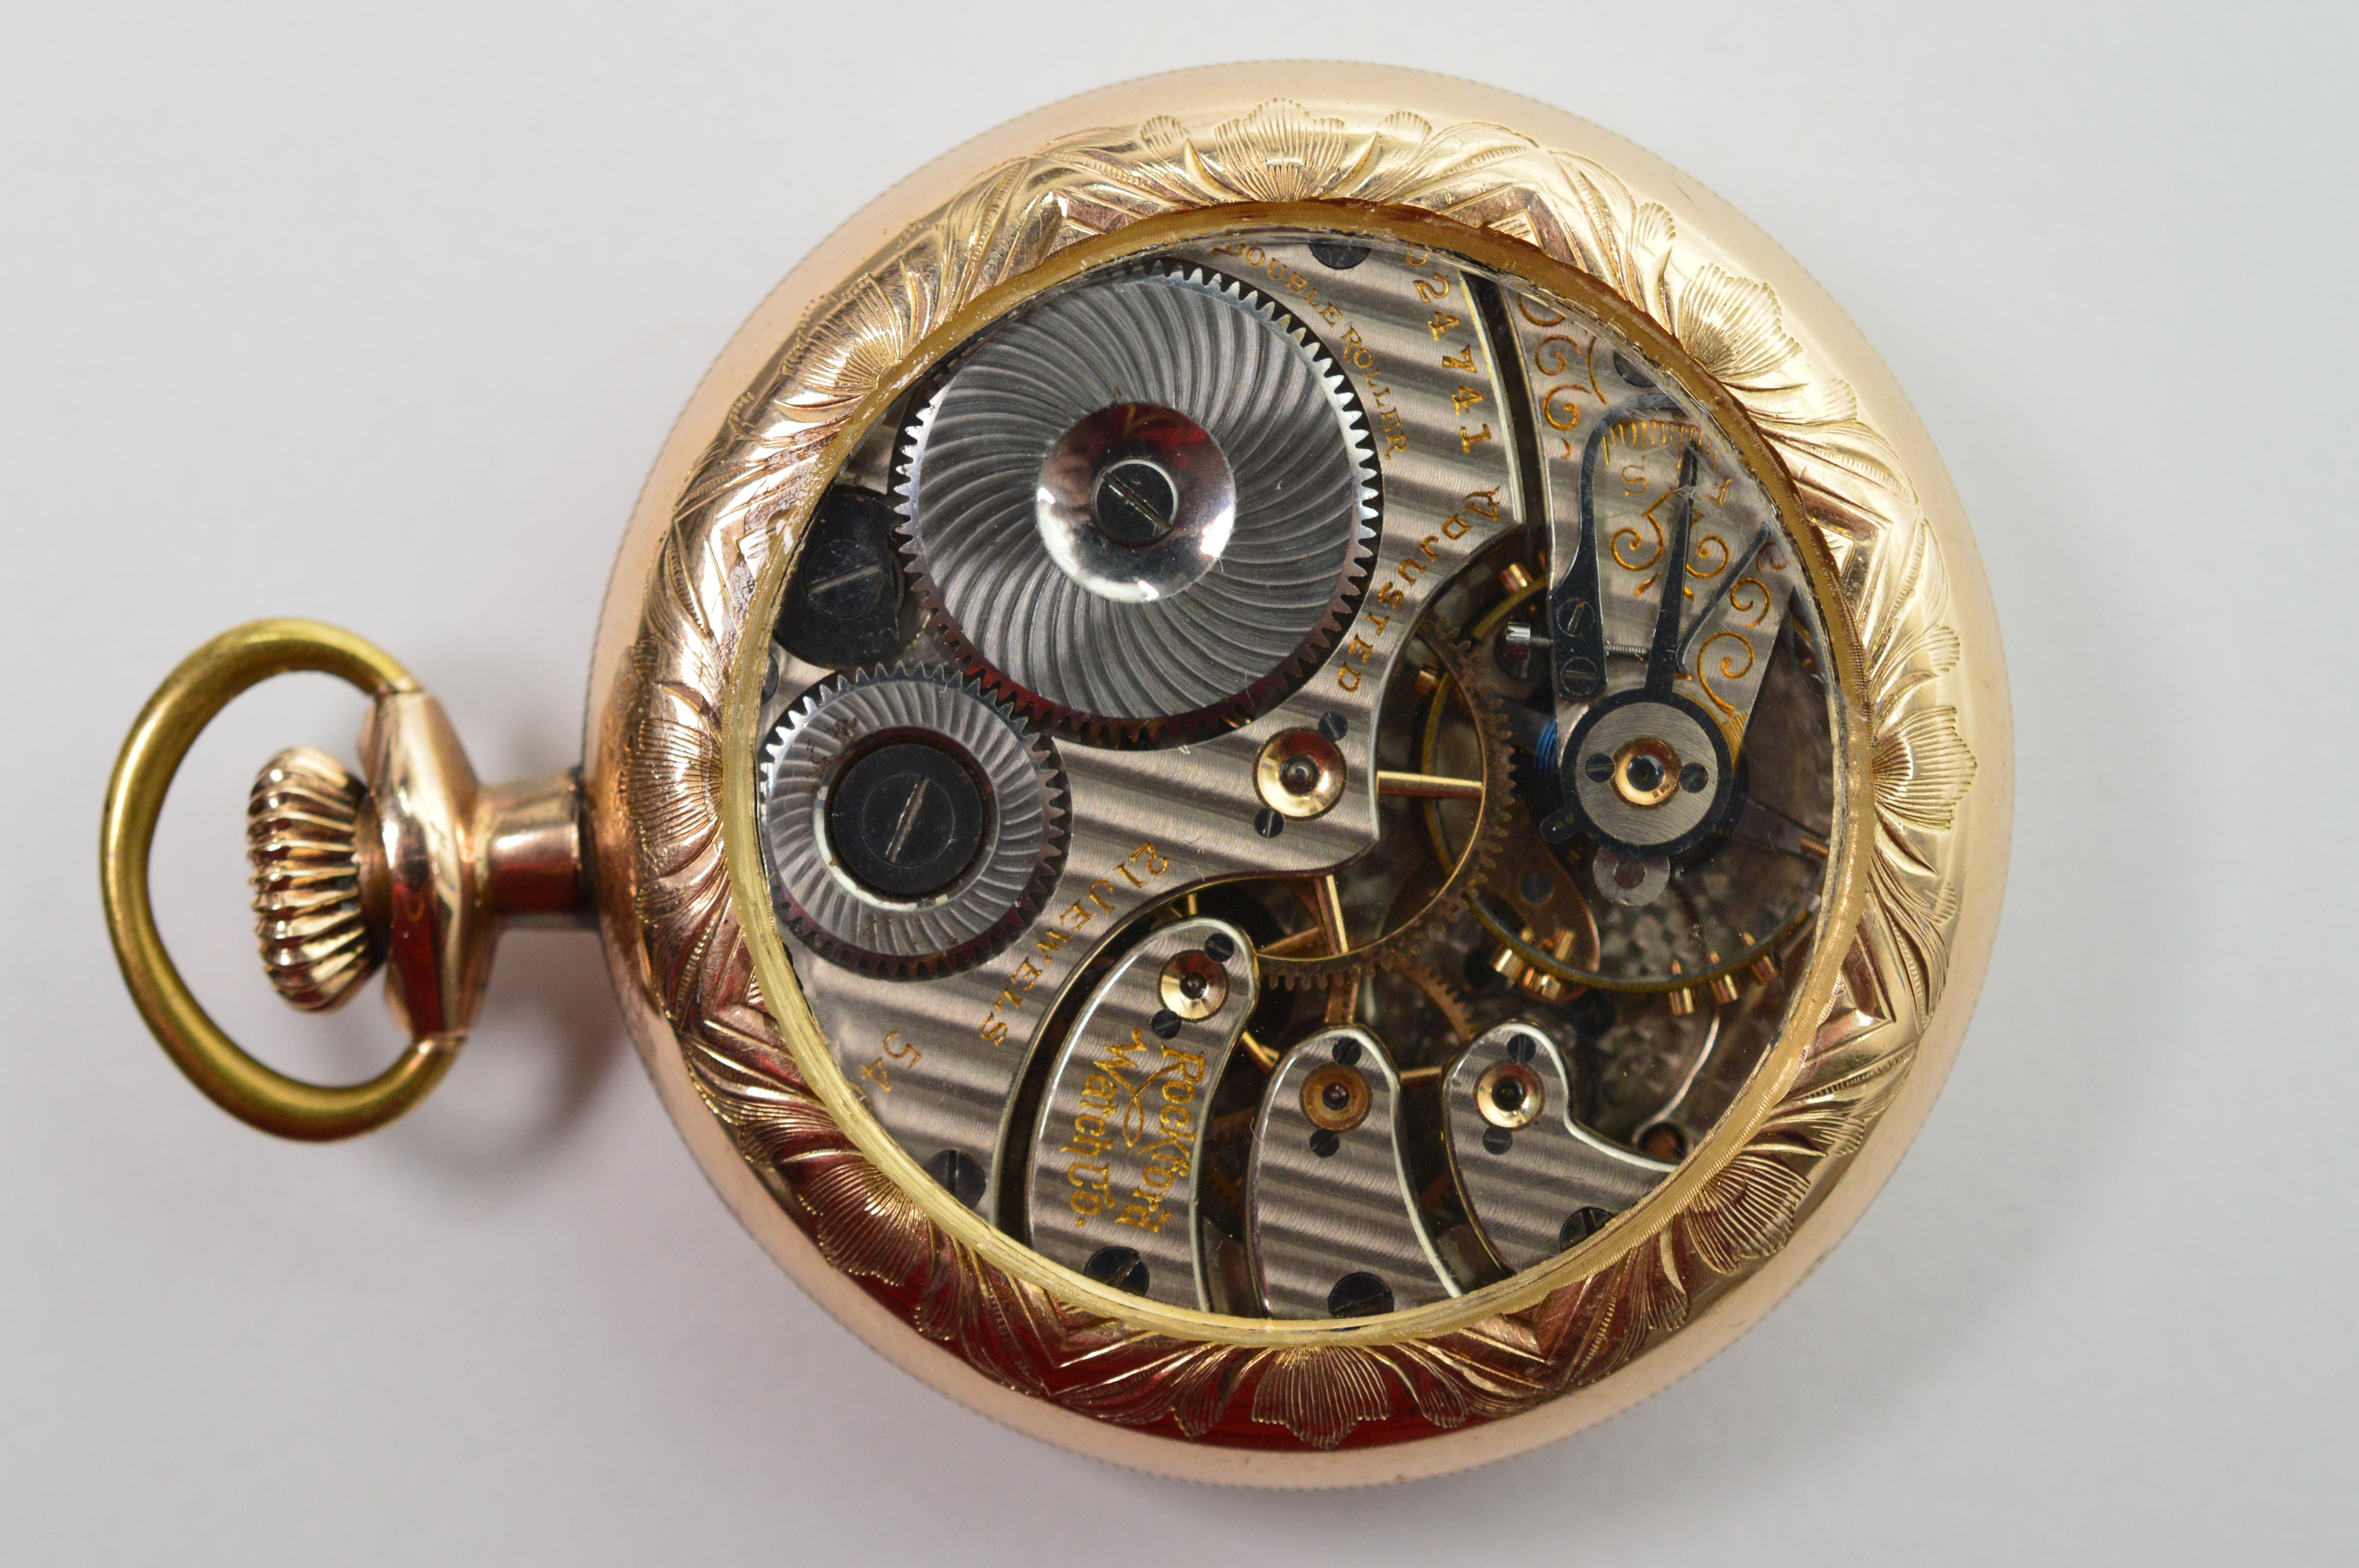 Enjoy this circa 1903 Rockford Railroad Style Pocket Watch with fancy engraved brass case. This fabulous size 16S American made piece is restored with a display back for a mesmerizing view of its beautiful fancy acid etched twenty one jewel